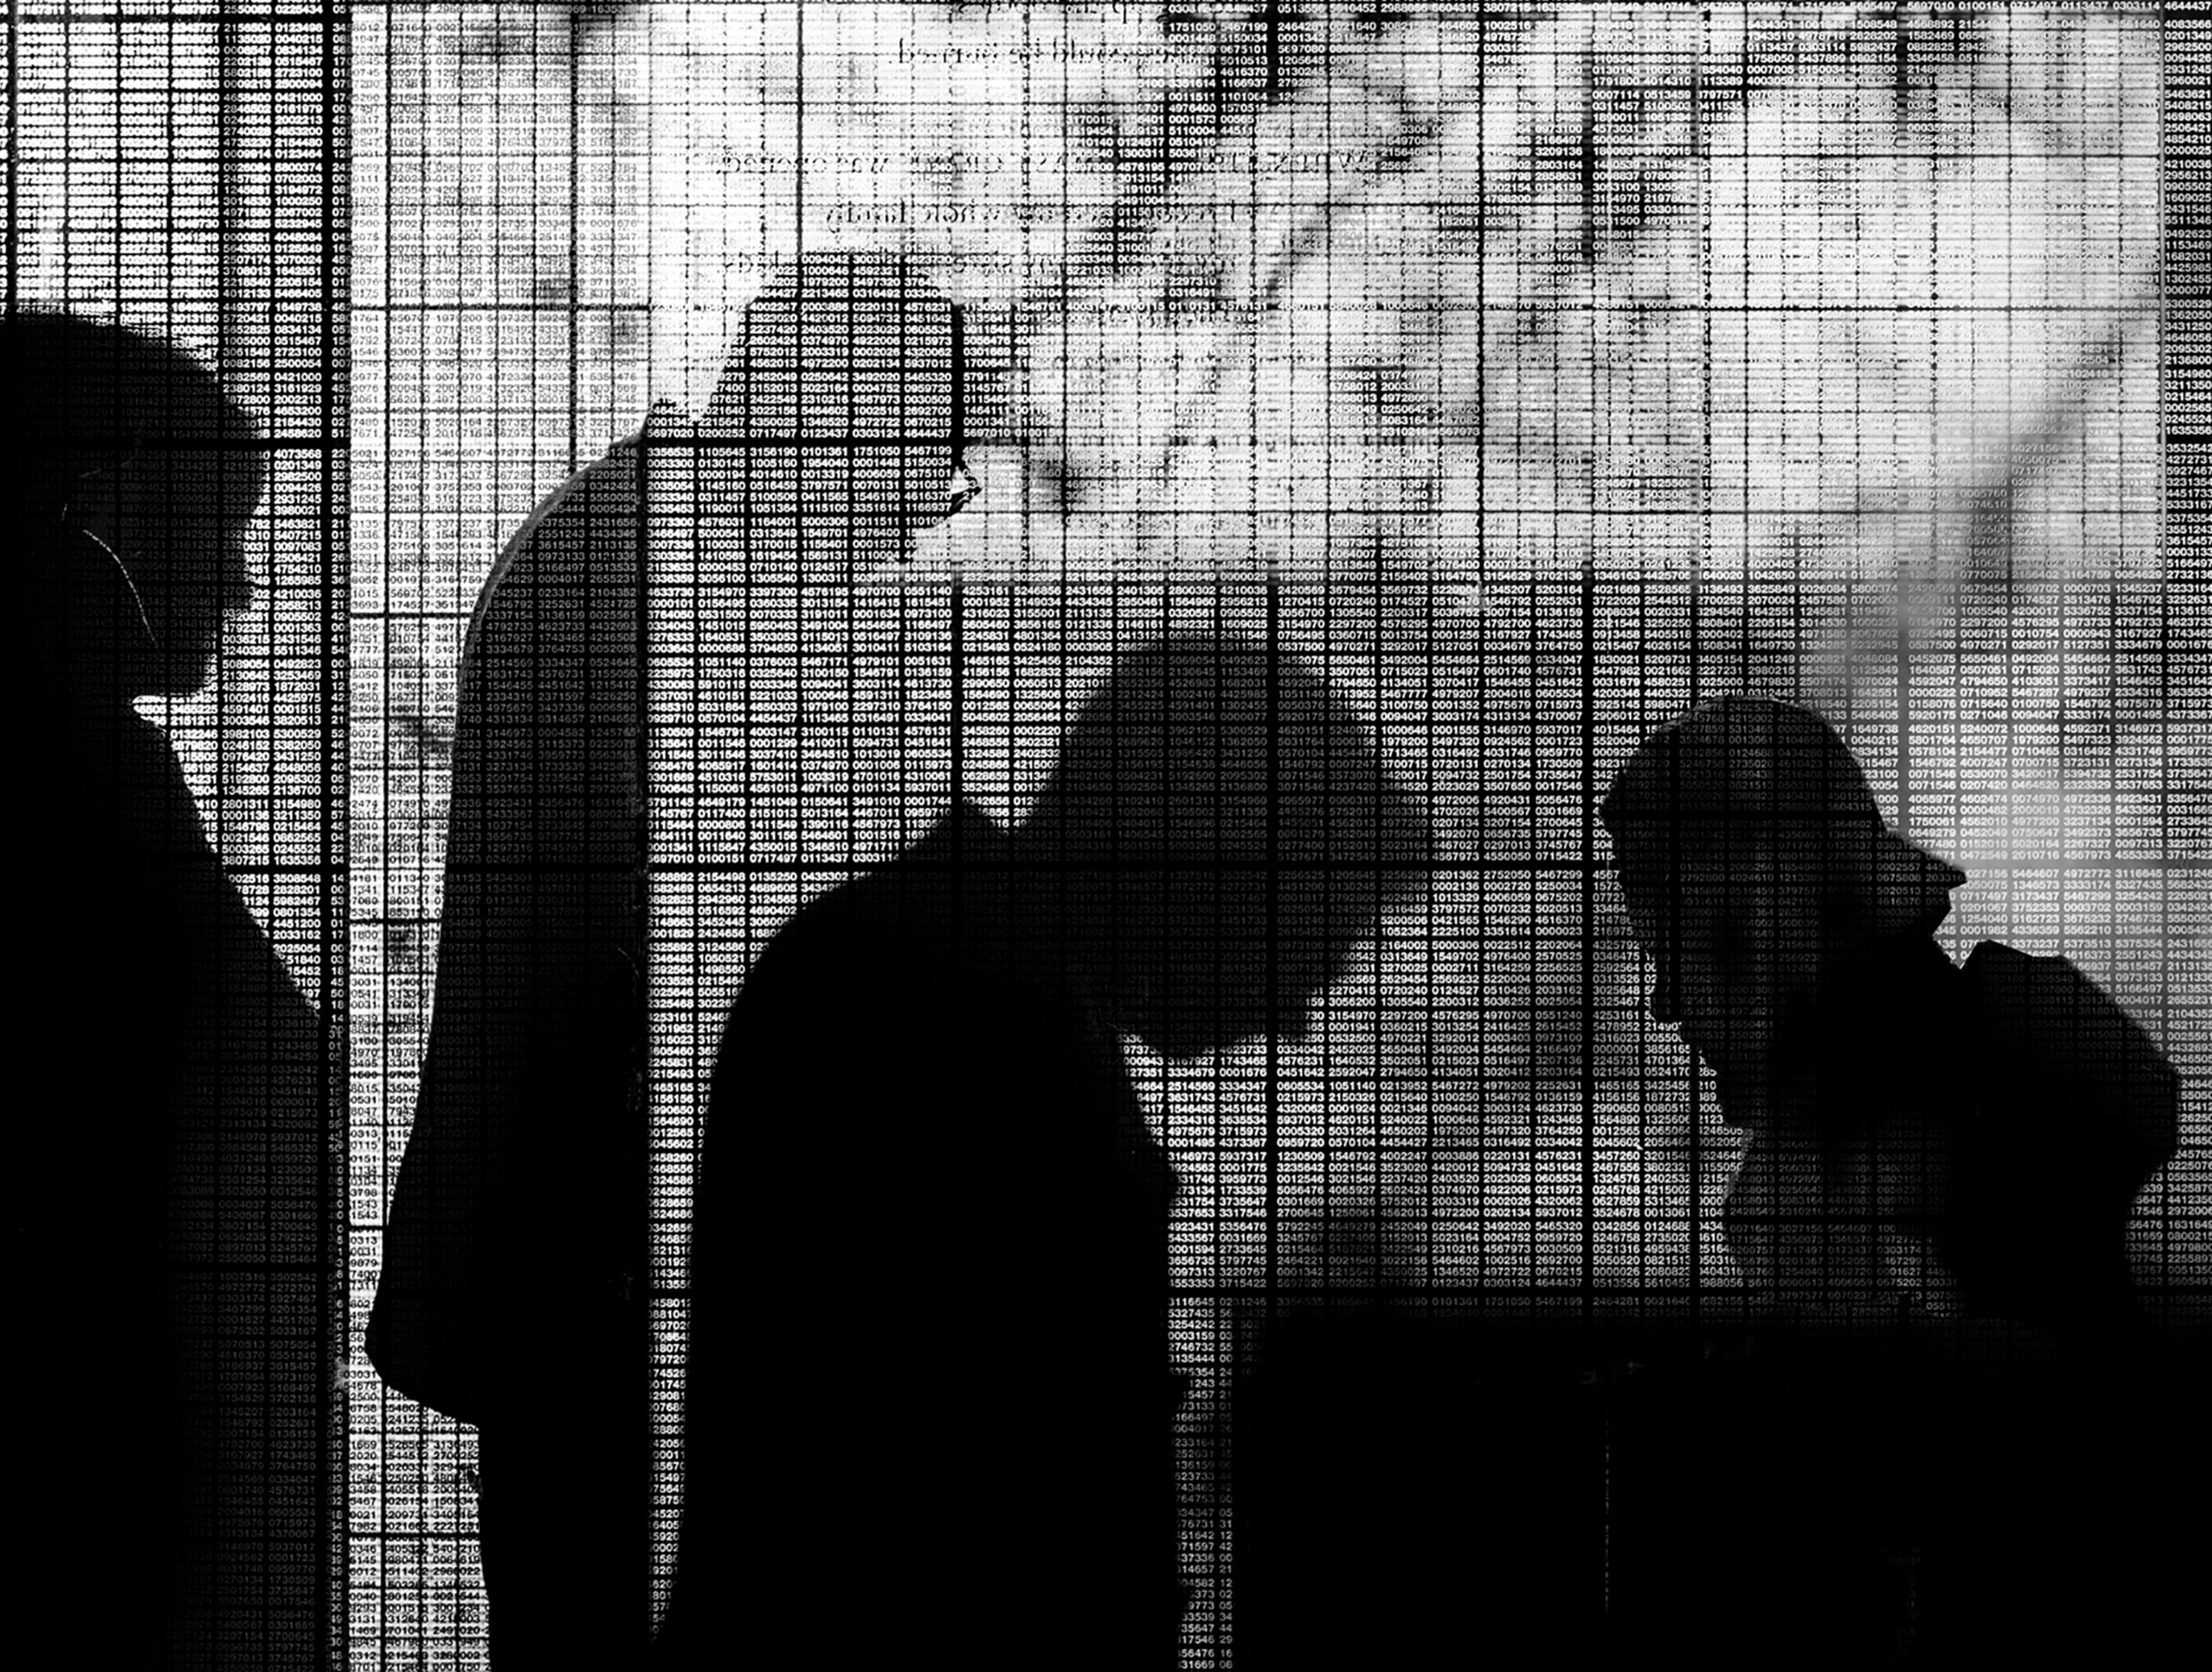 Silhouettes of four people walking through the path of the glass towers of the New England Holocaust Memorial in Boston are seemingly tattooed with the shadows of numbers etched in a grid in the glass that represent those of the Jews murdered.